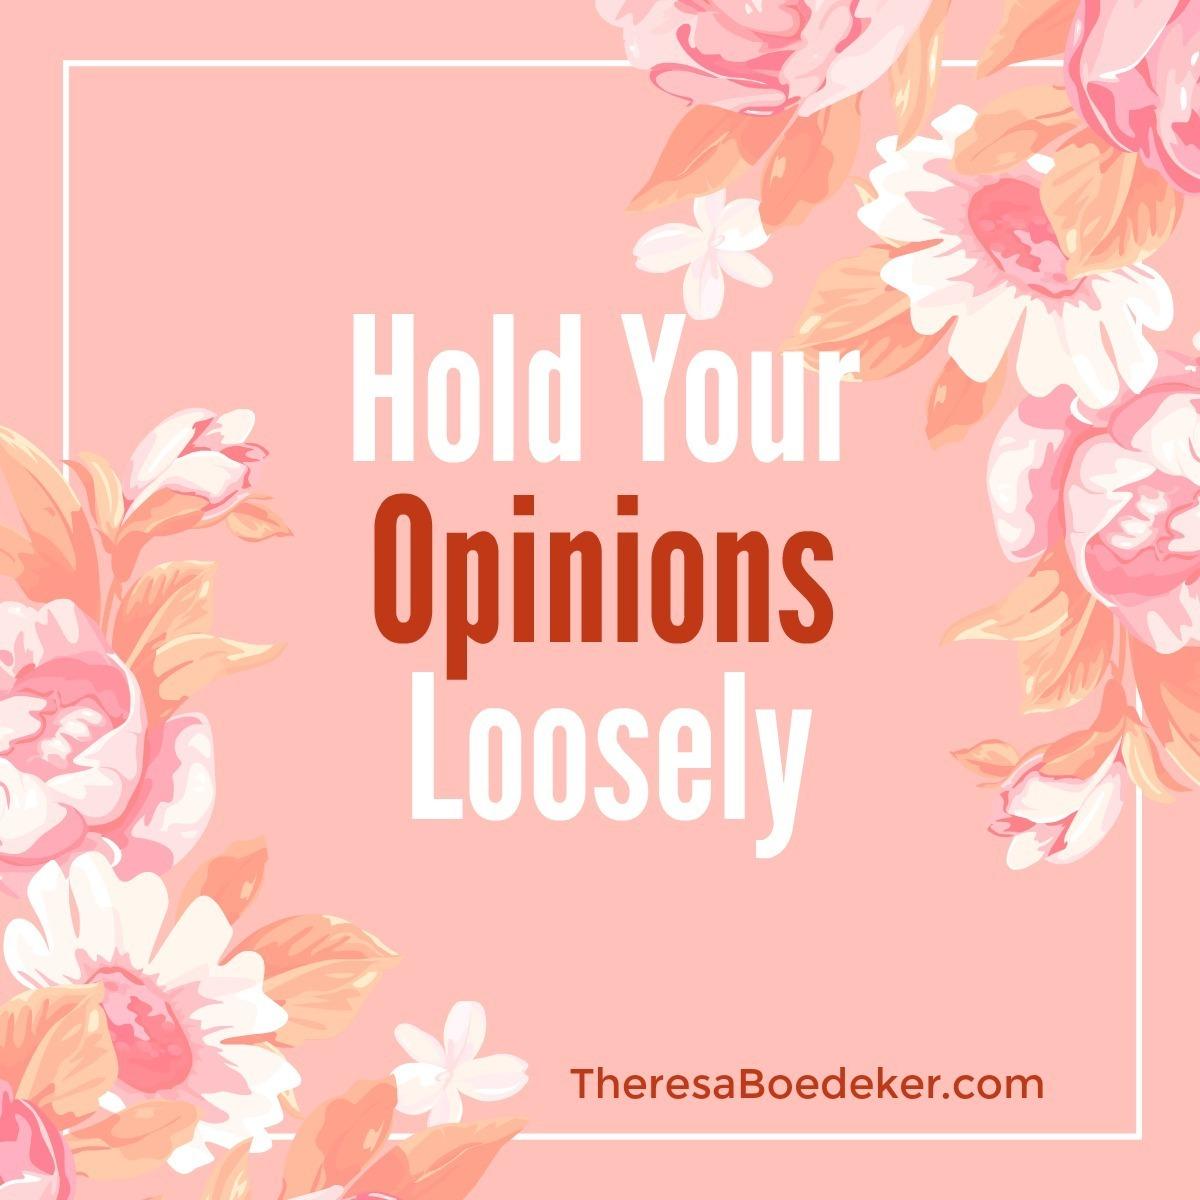 Problems arise when we hold our opinions so tightly that we argue and fight over them. Learn to hold your opinions loosely.